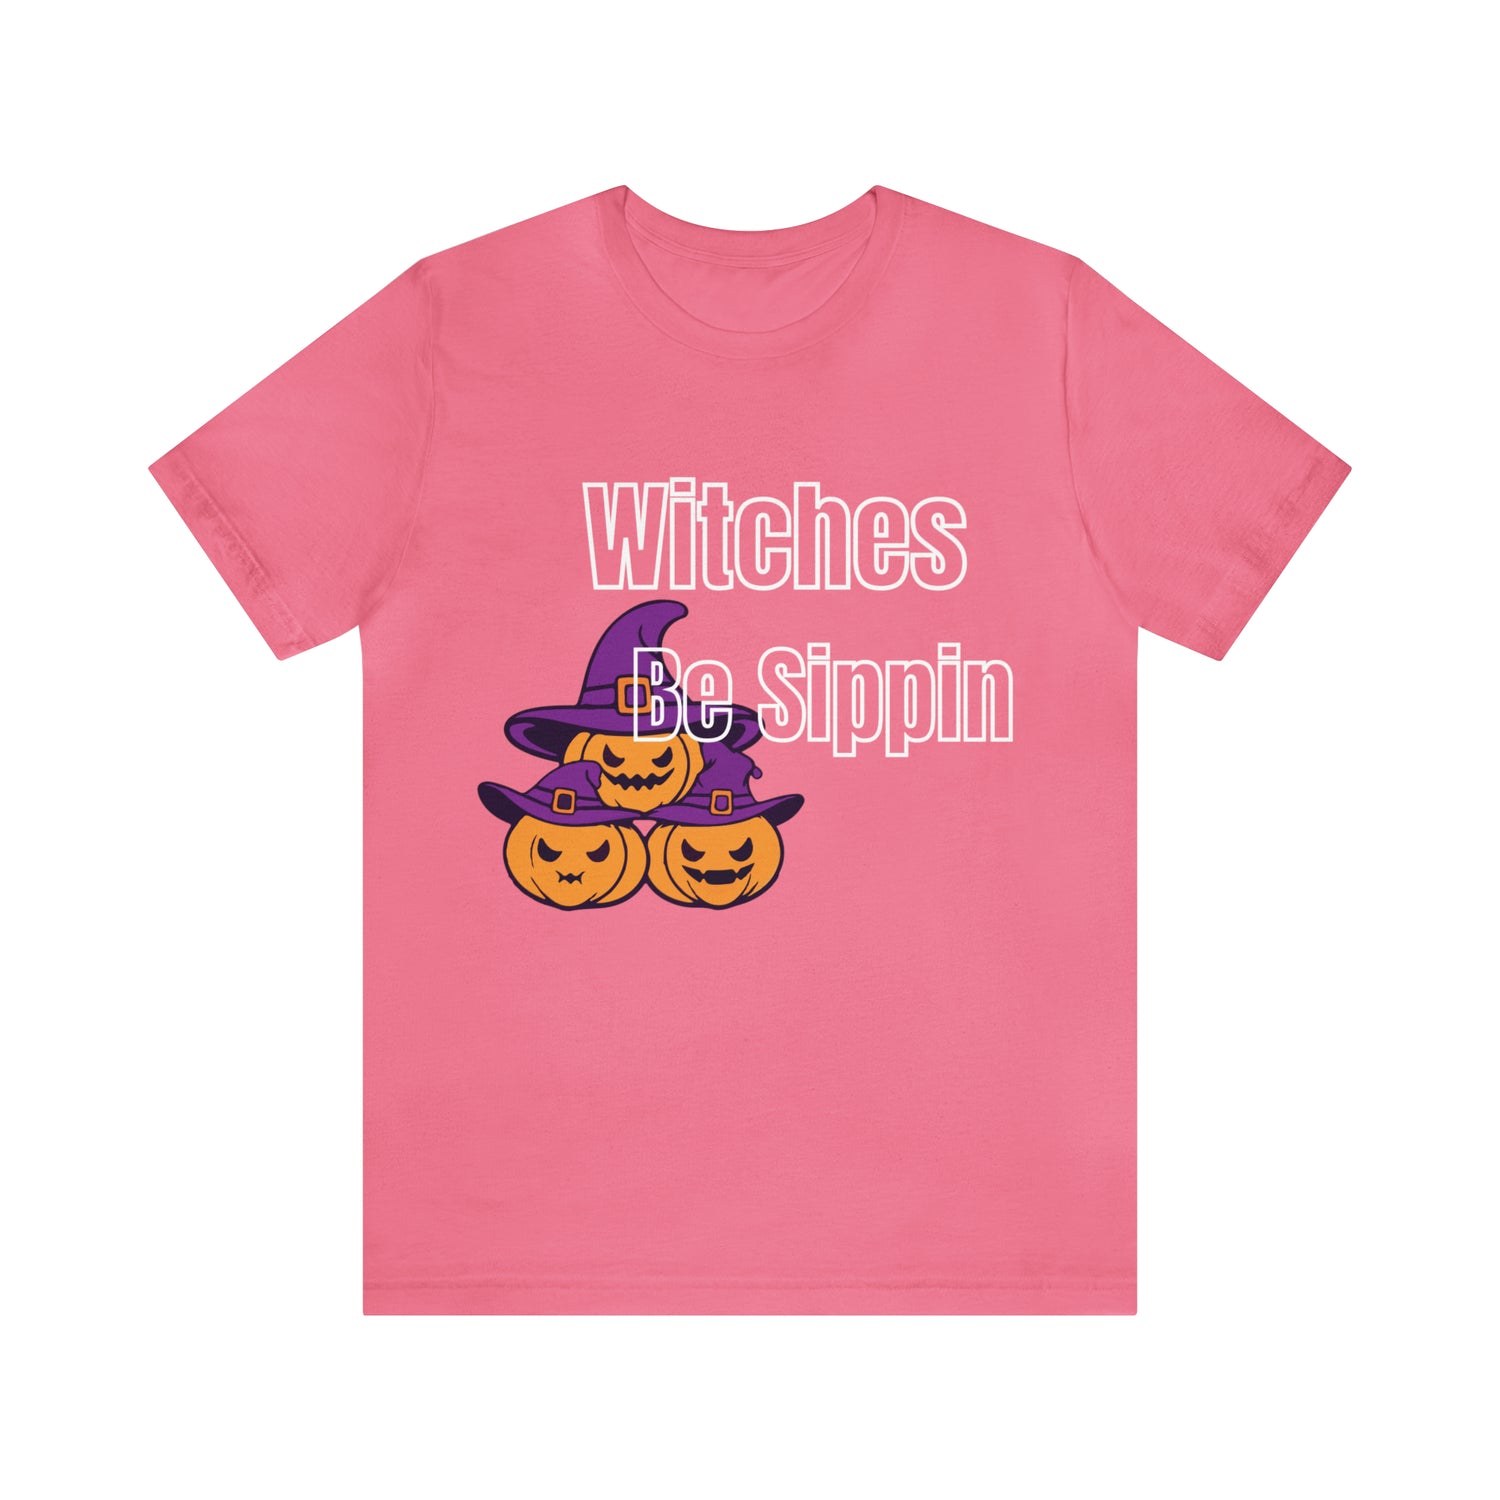 T-Shirt Tshirt Halloween Gift for Friends and Family Short Sleeve T Shirt Petrova Designs